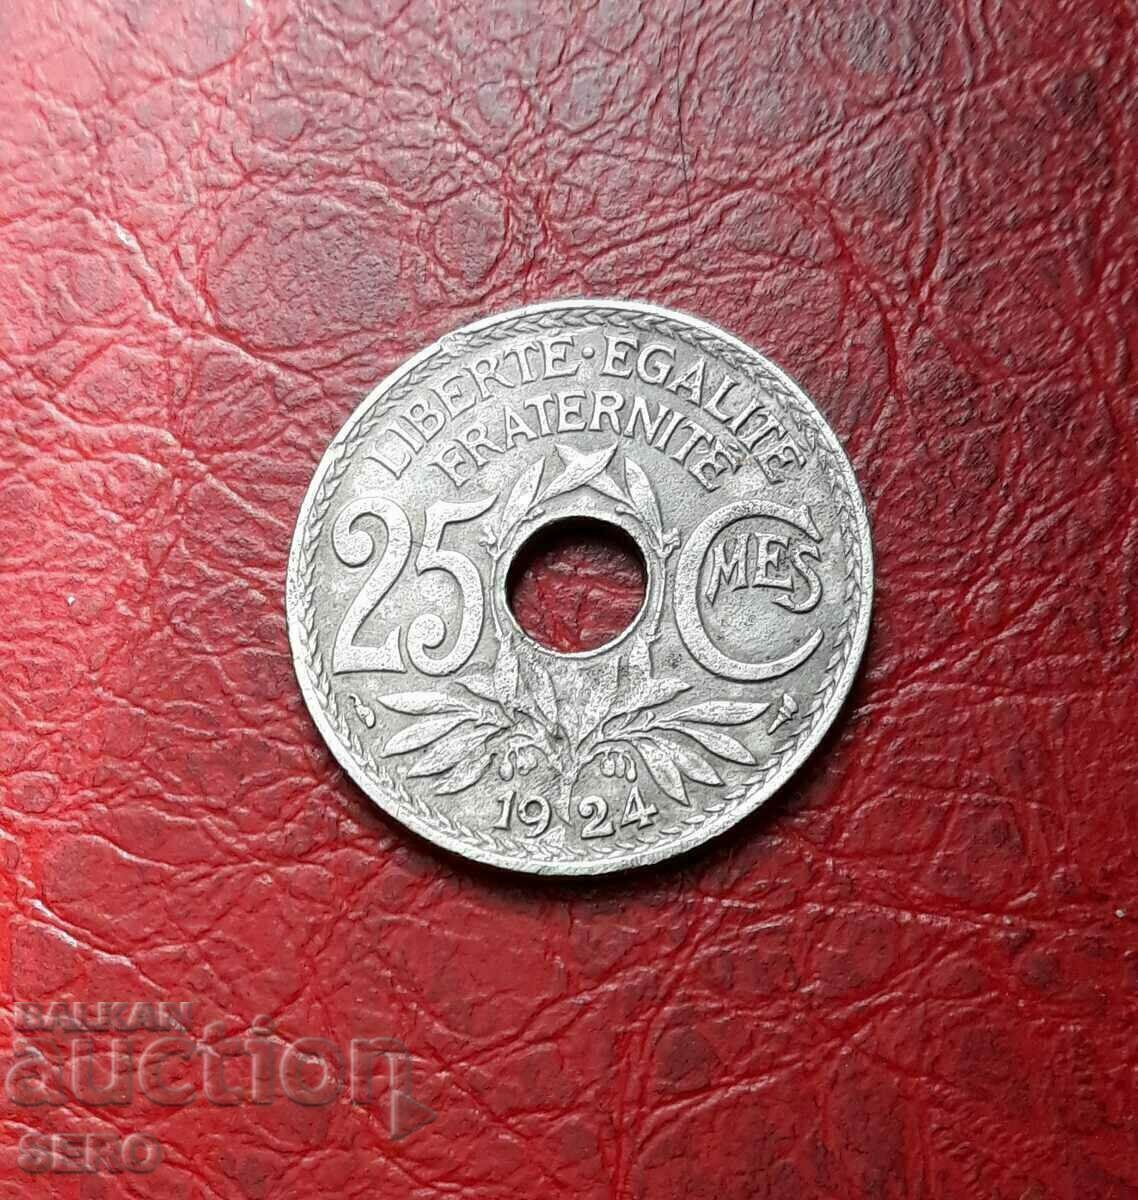 France-25 cents 1924